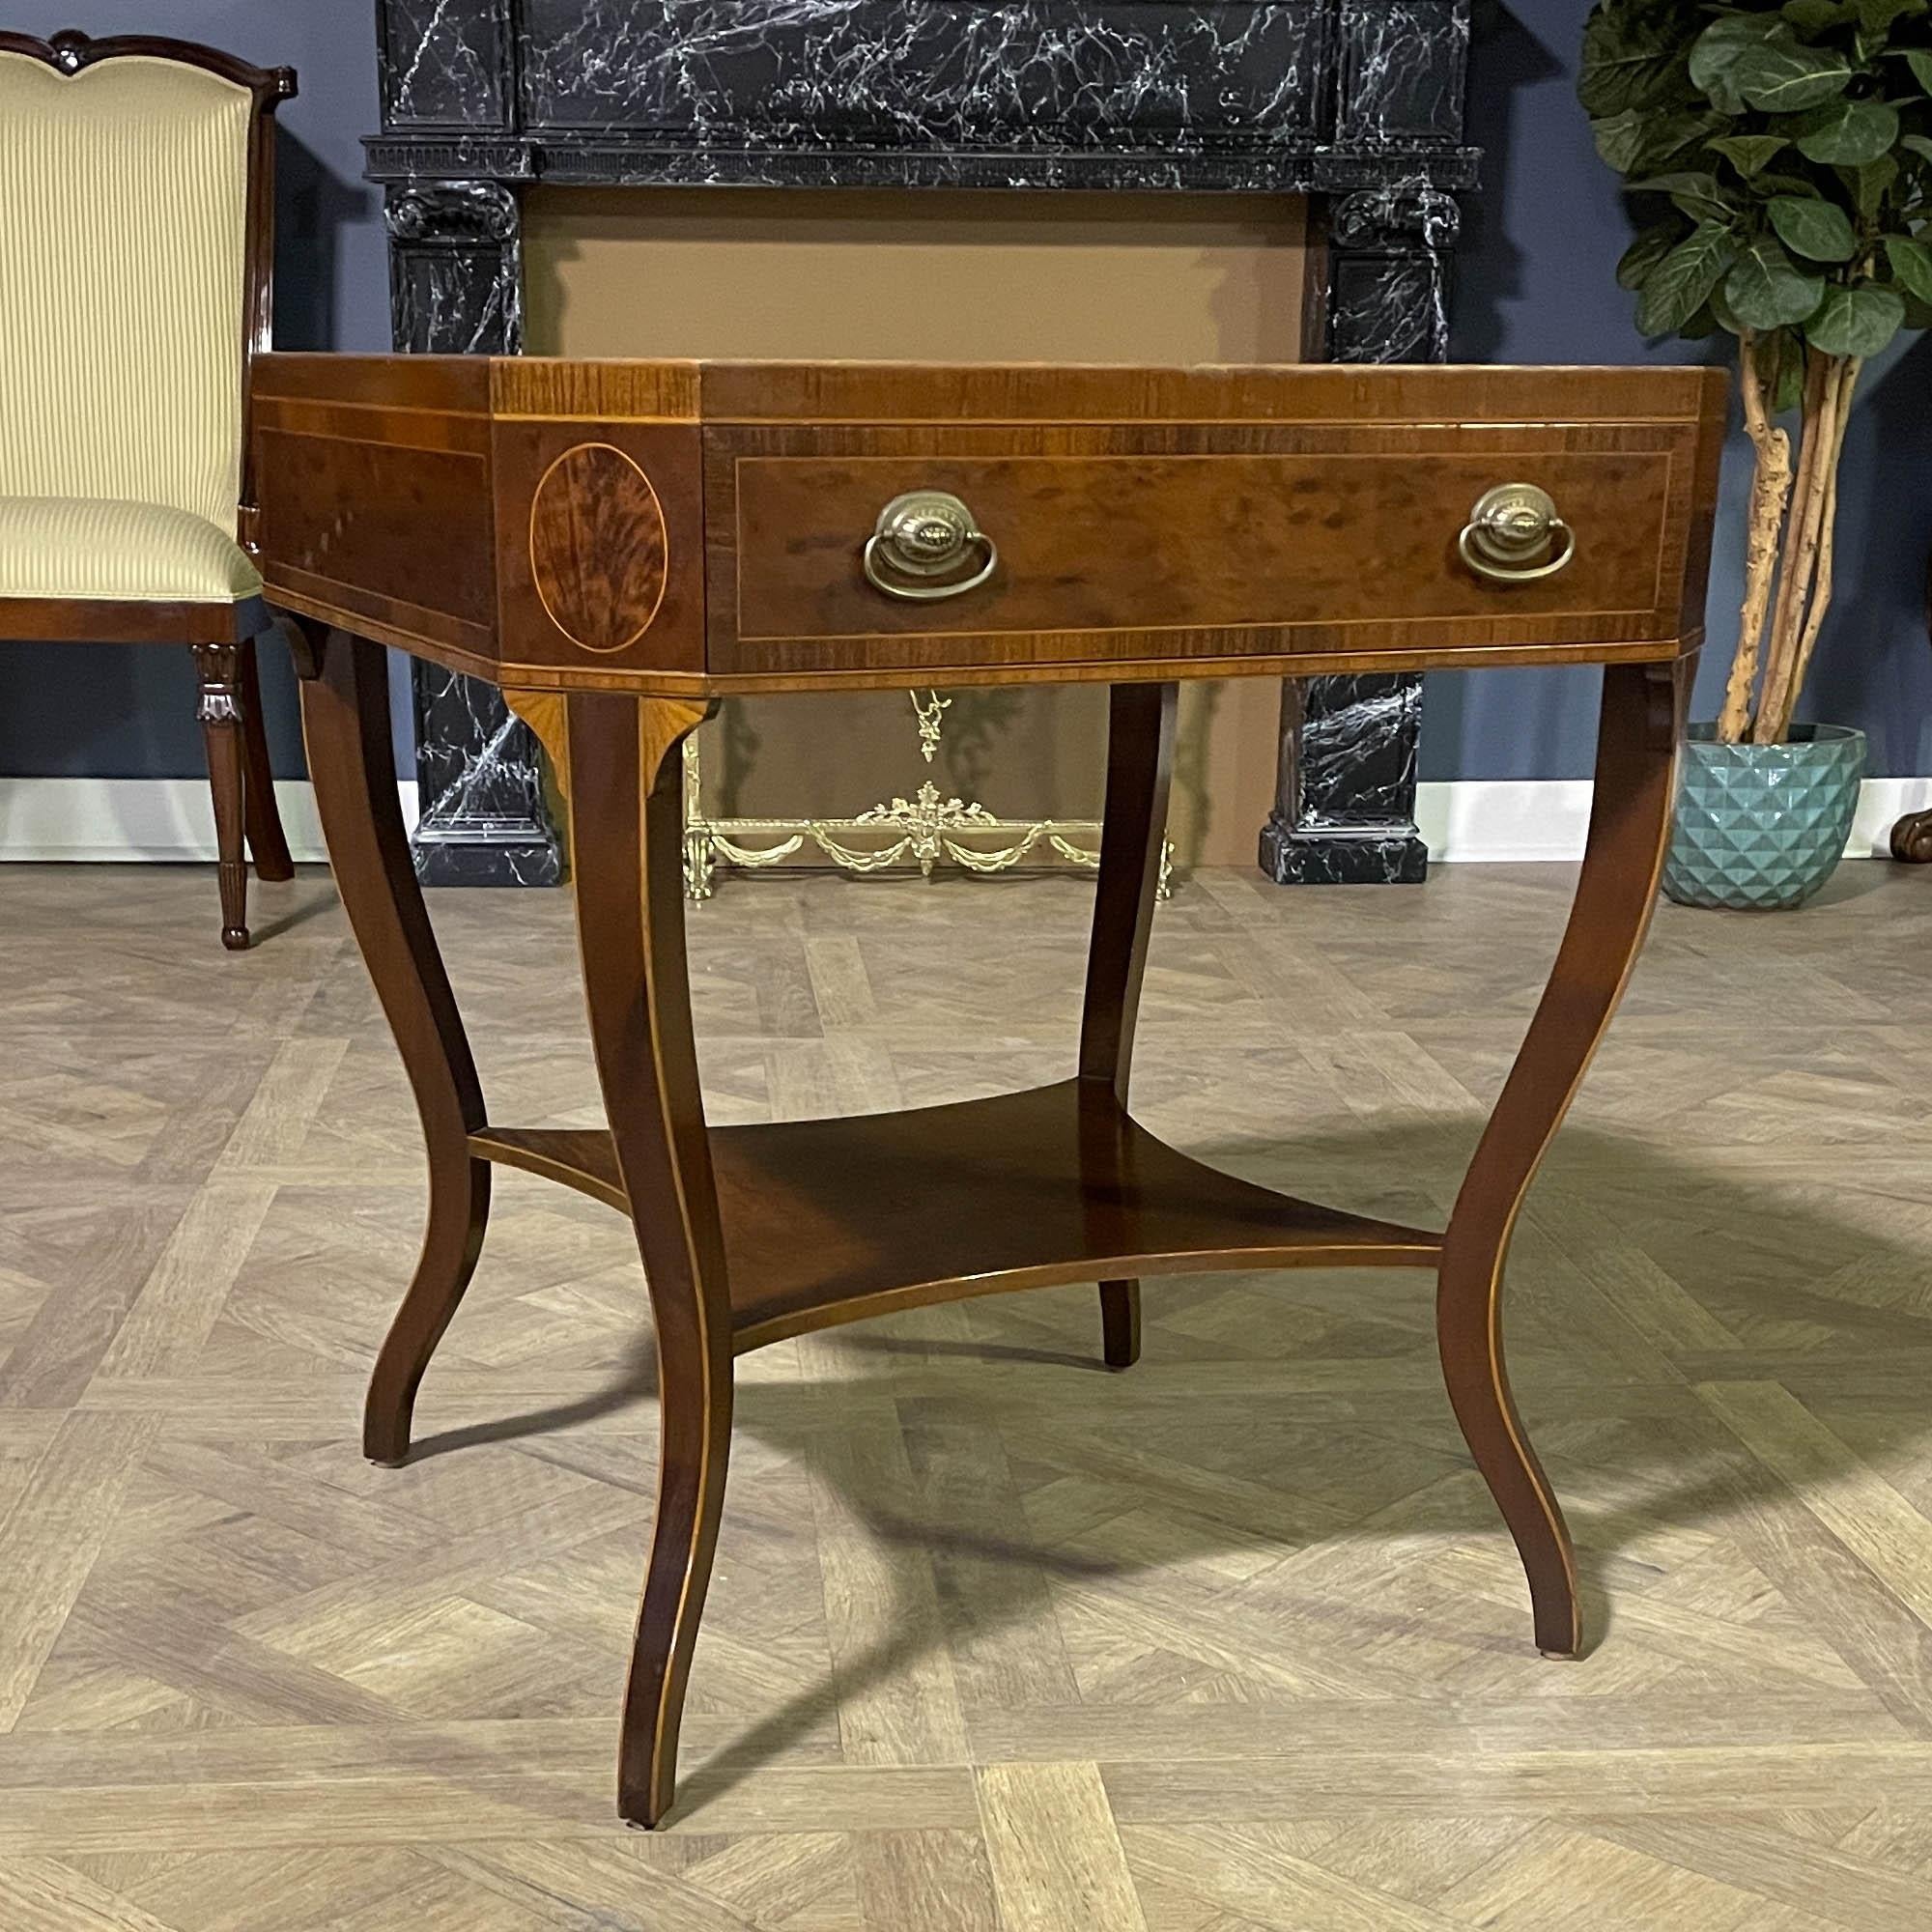 From Niagara Furniture a Vintage Schmieg and Kotzian End Table in excellent condition. The top of the piece has recently been restored to its’ original luster.

Both elegant and incredibly detailed this beautiful Vintage Vintage Schmieg and Kotzian